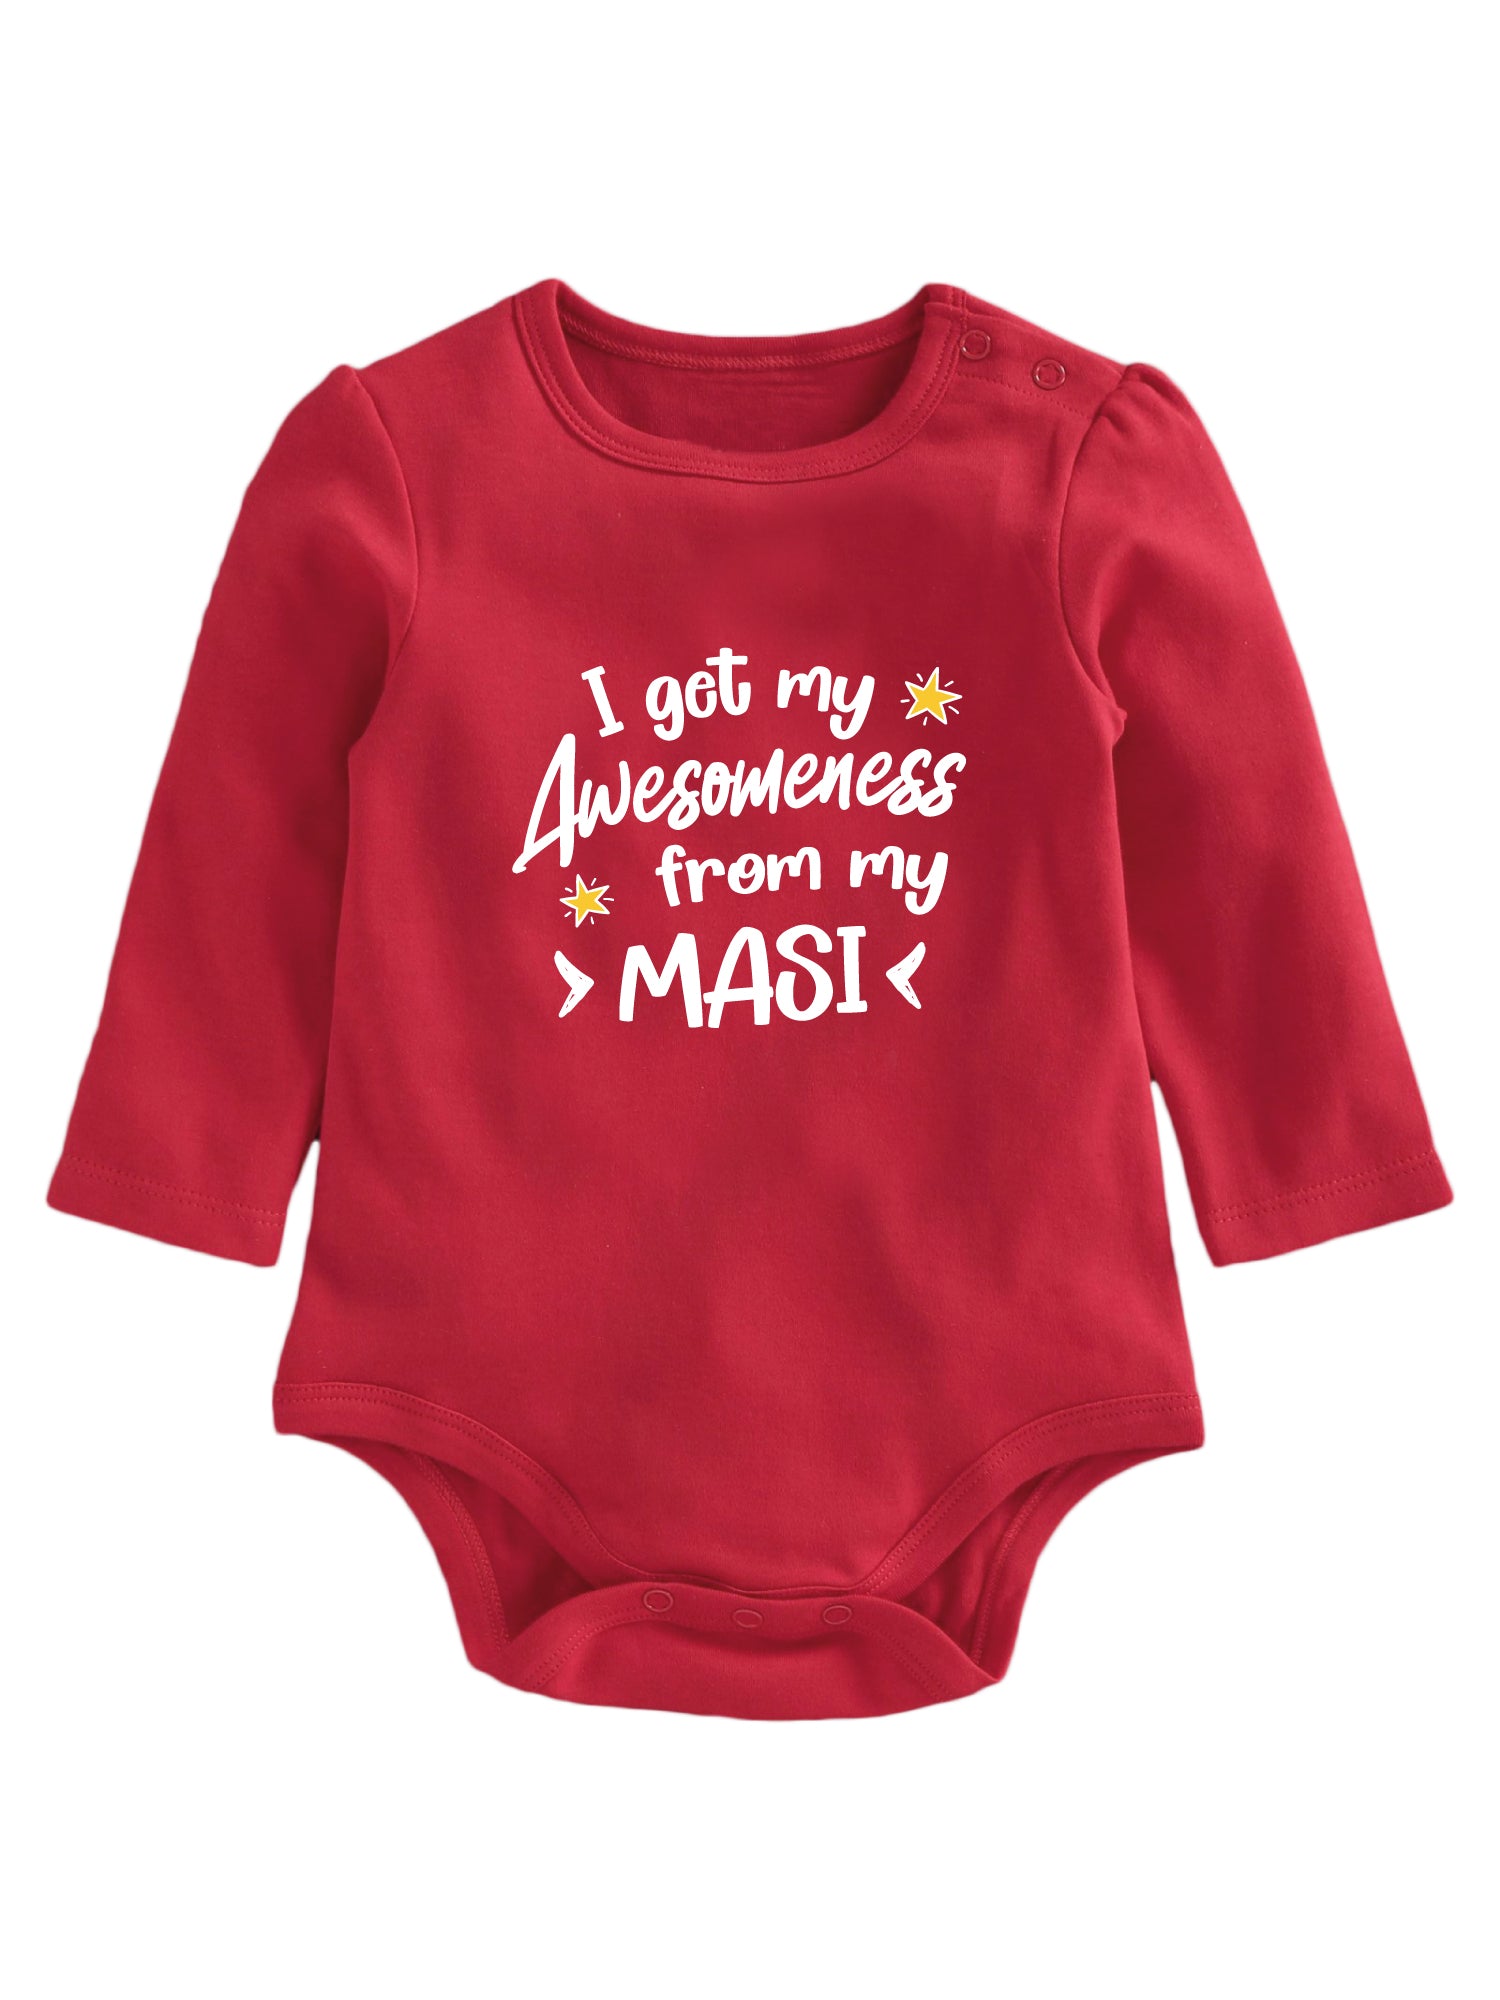 I Get My Awesomeness from Masi - Onesie